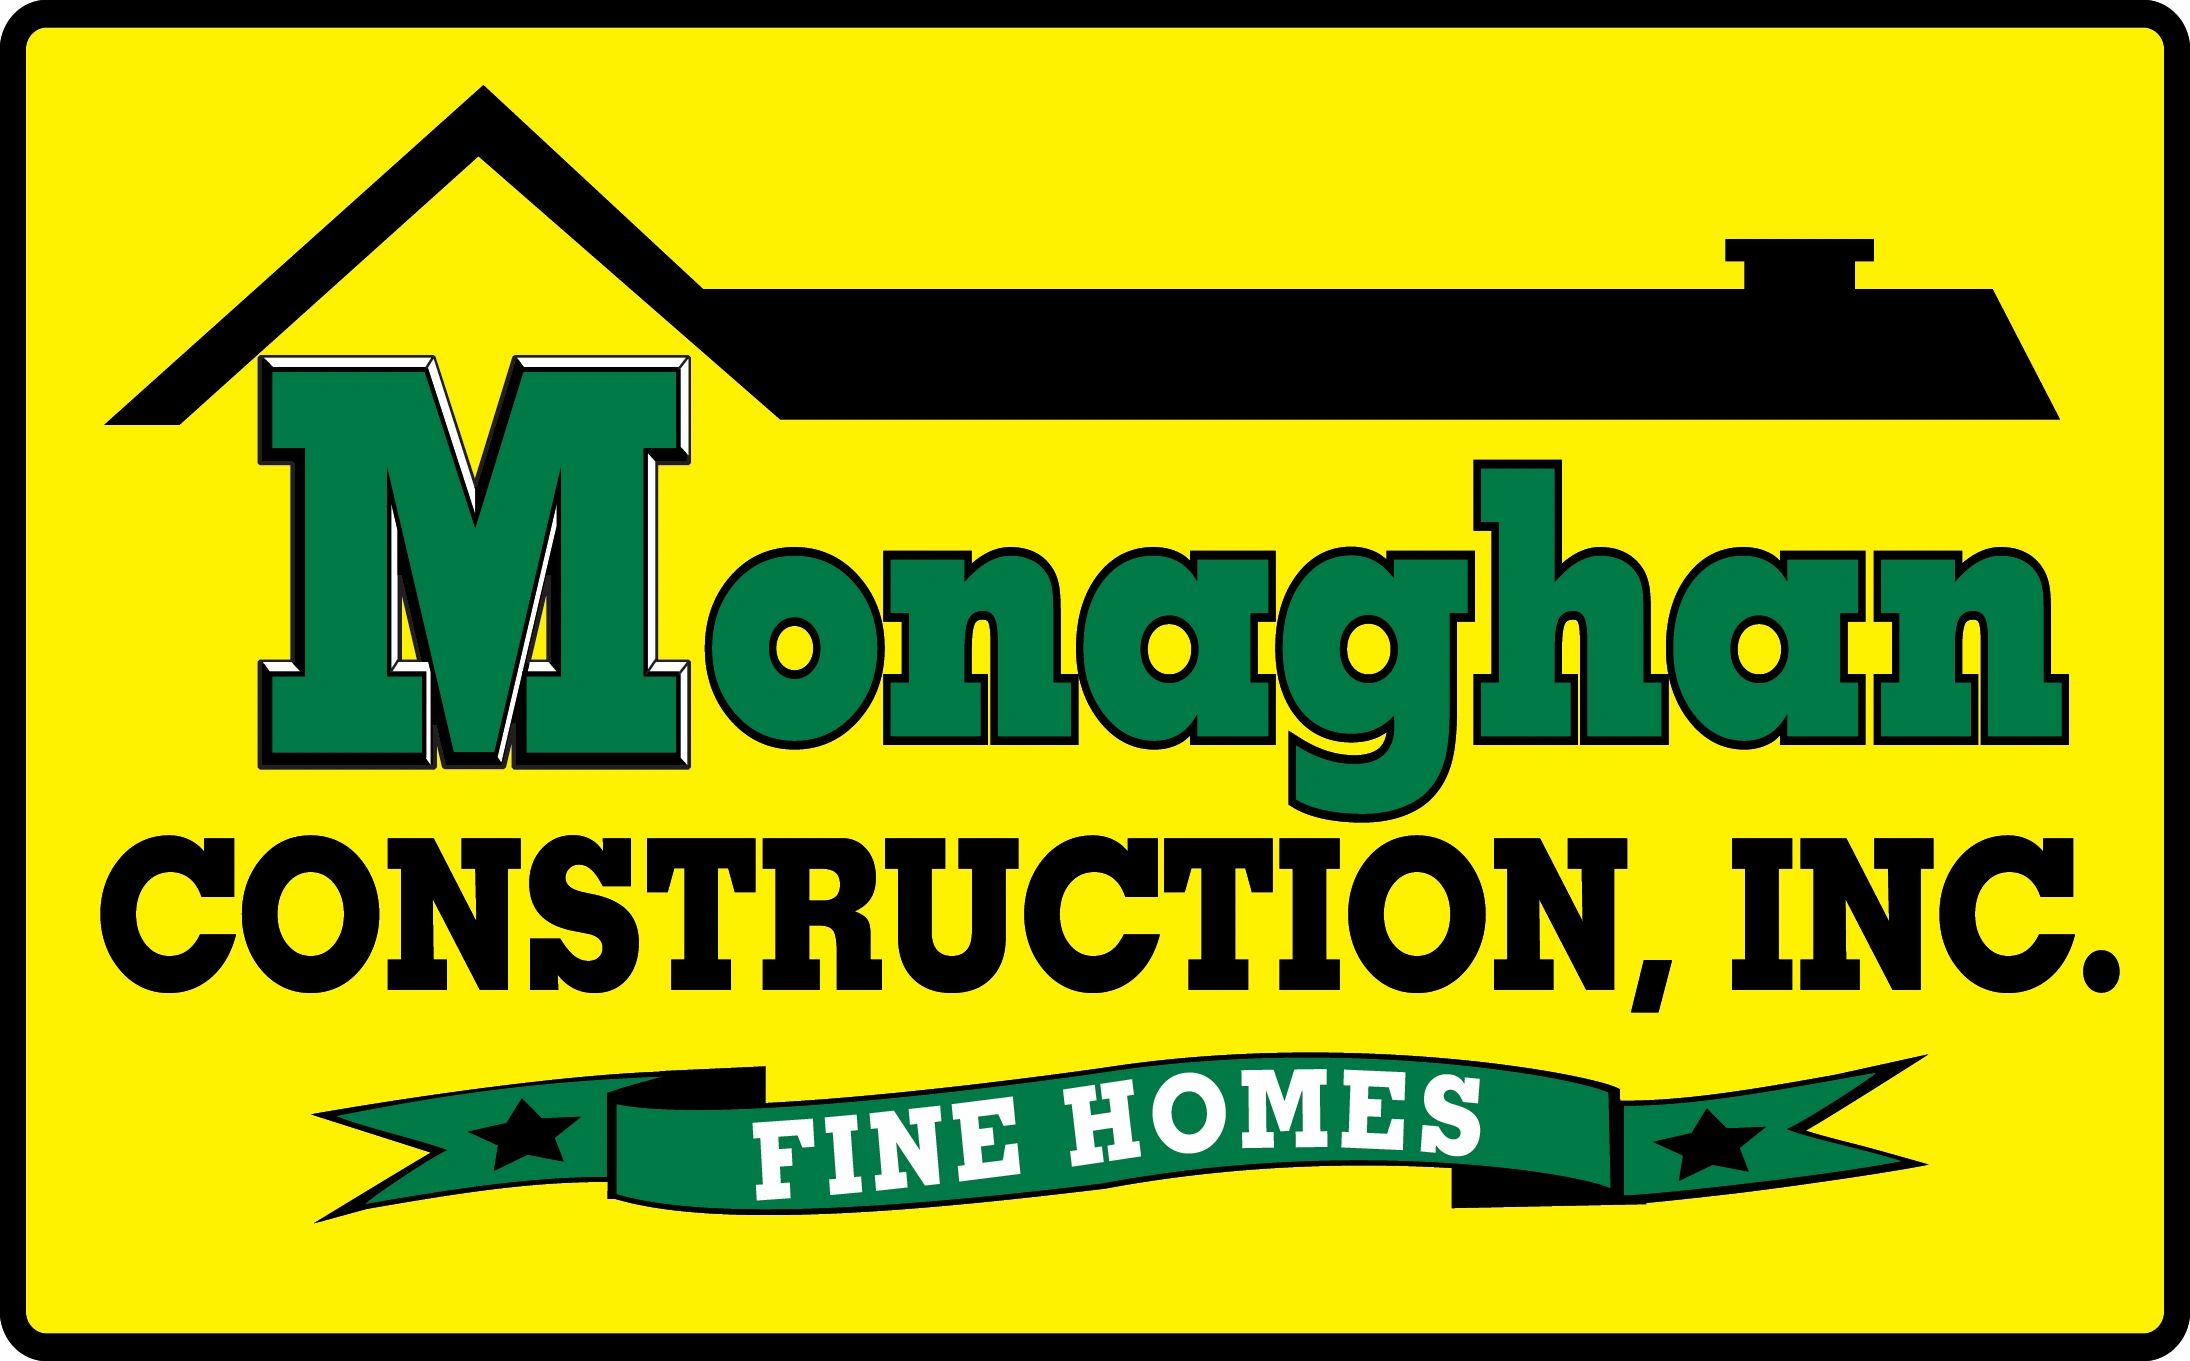 Monaghan Builder and Contractor Directory